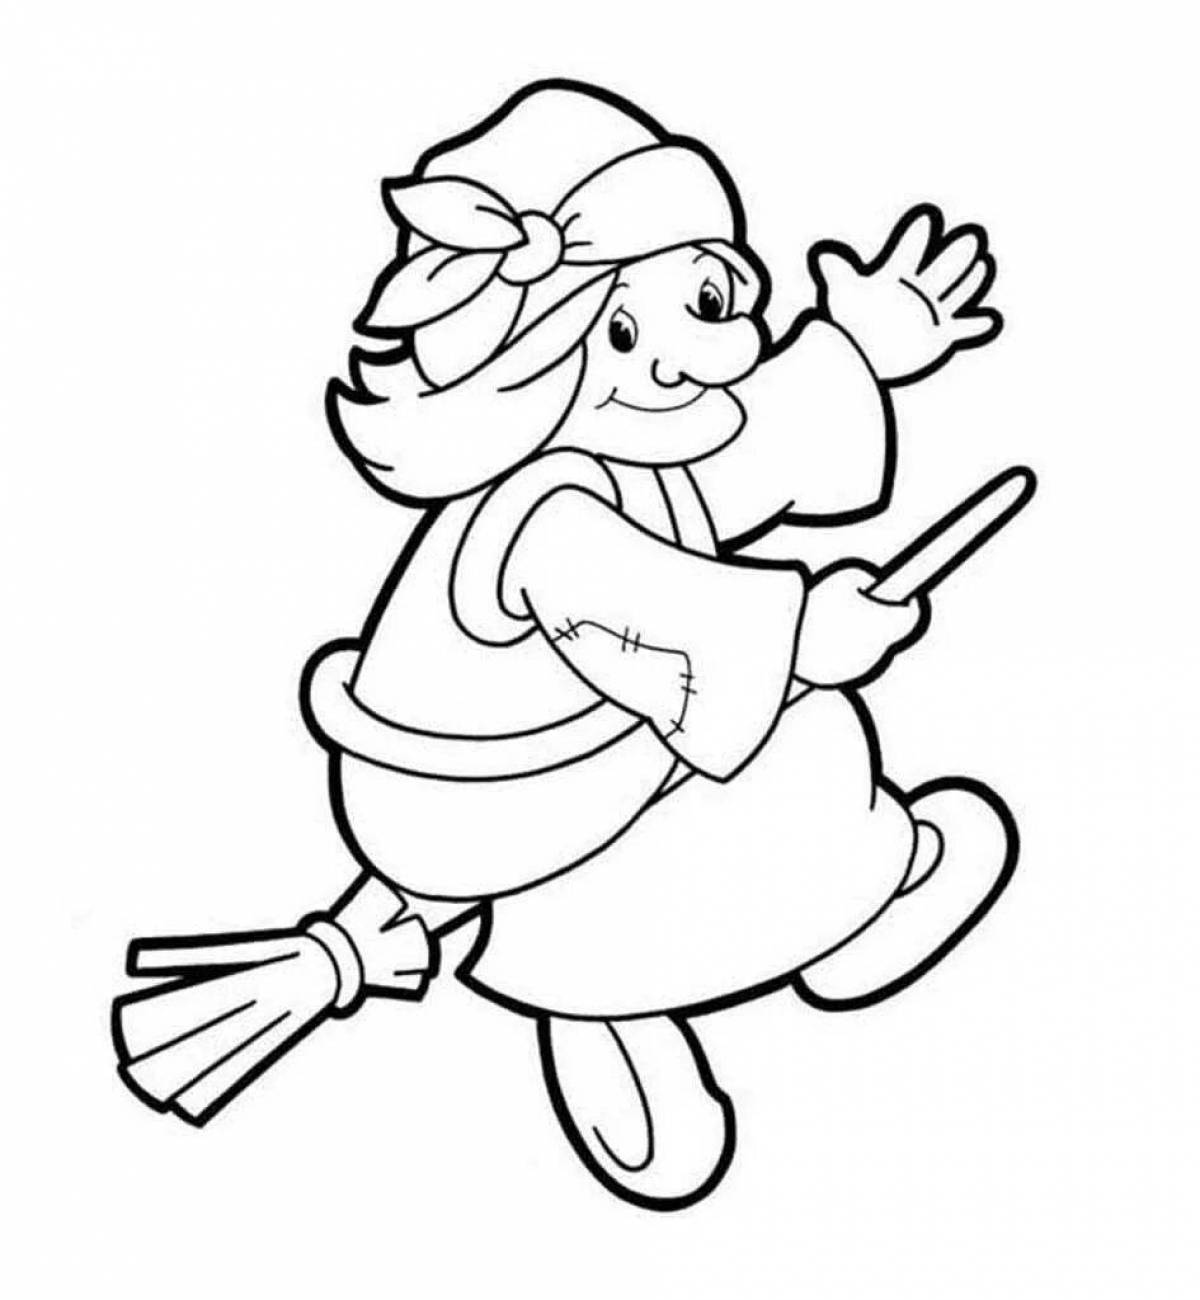 Fabulous coloring pages heroes of fairy tales